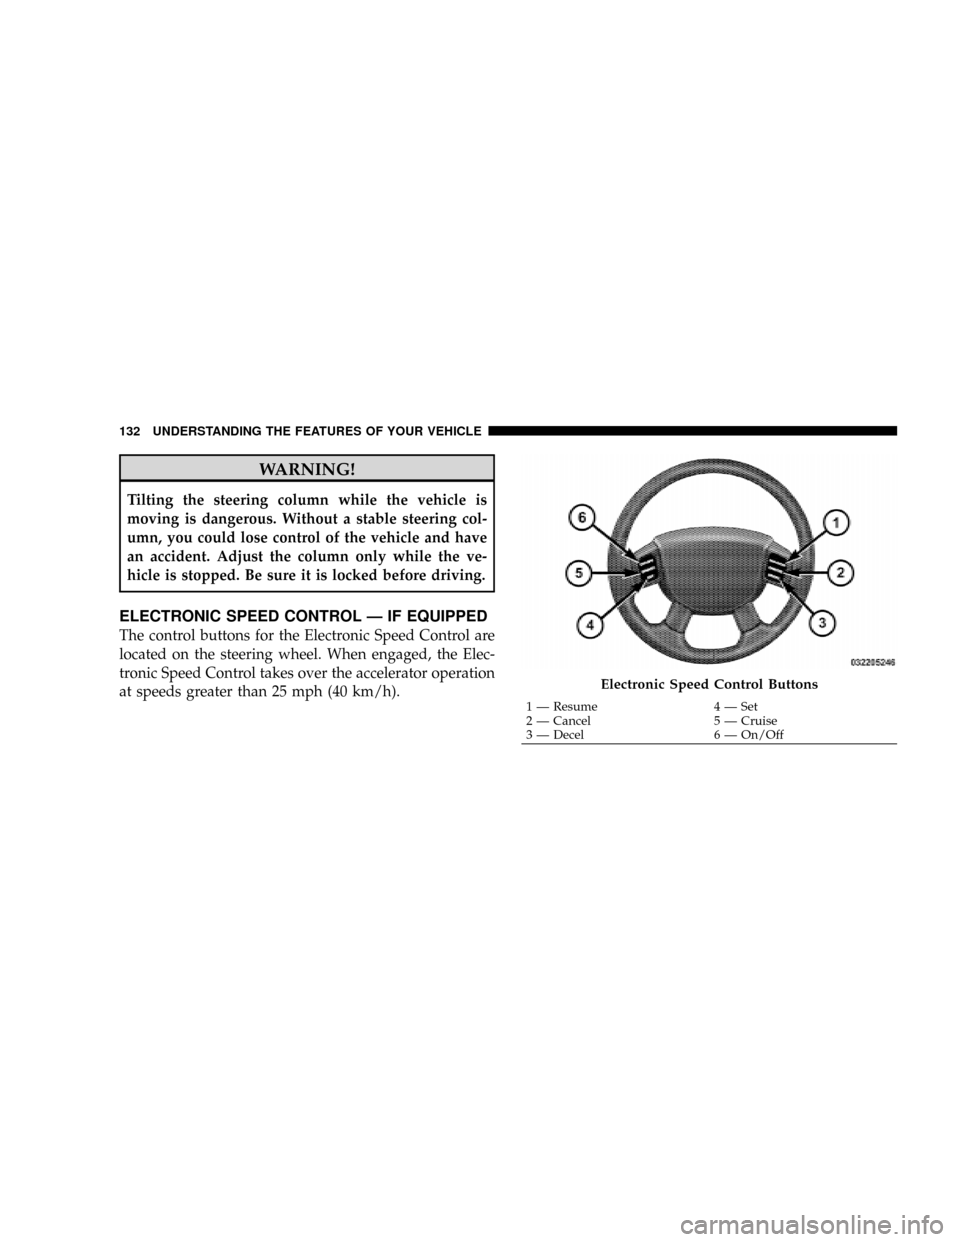 DODGE DAKOTA 2009 3.G Owners Manual WARNING!
Tilting the steering column while the vehicle is
moving is dangerous. Without a stable steering col-
umn, you could lose control of the vehicle and have
an accident. Adjust the column only wh